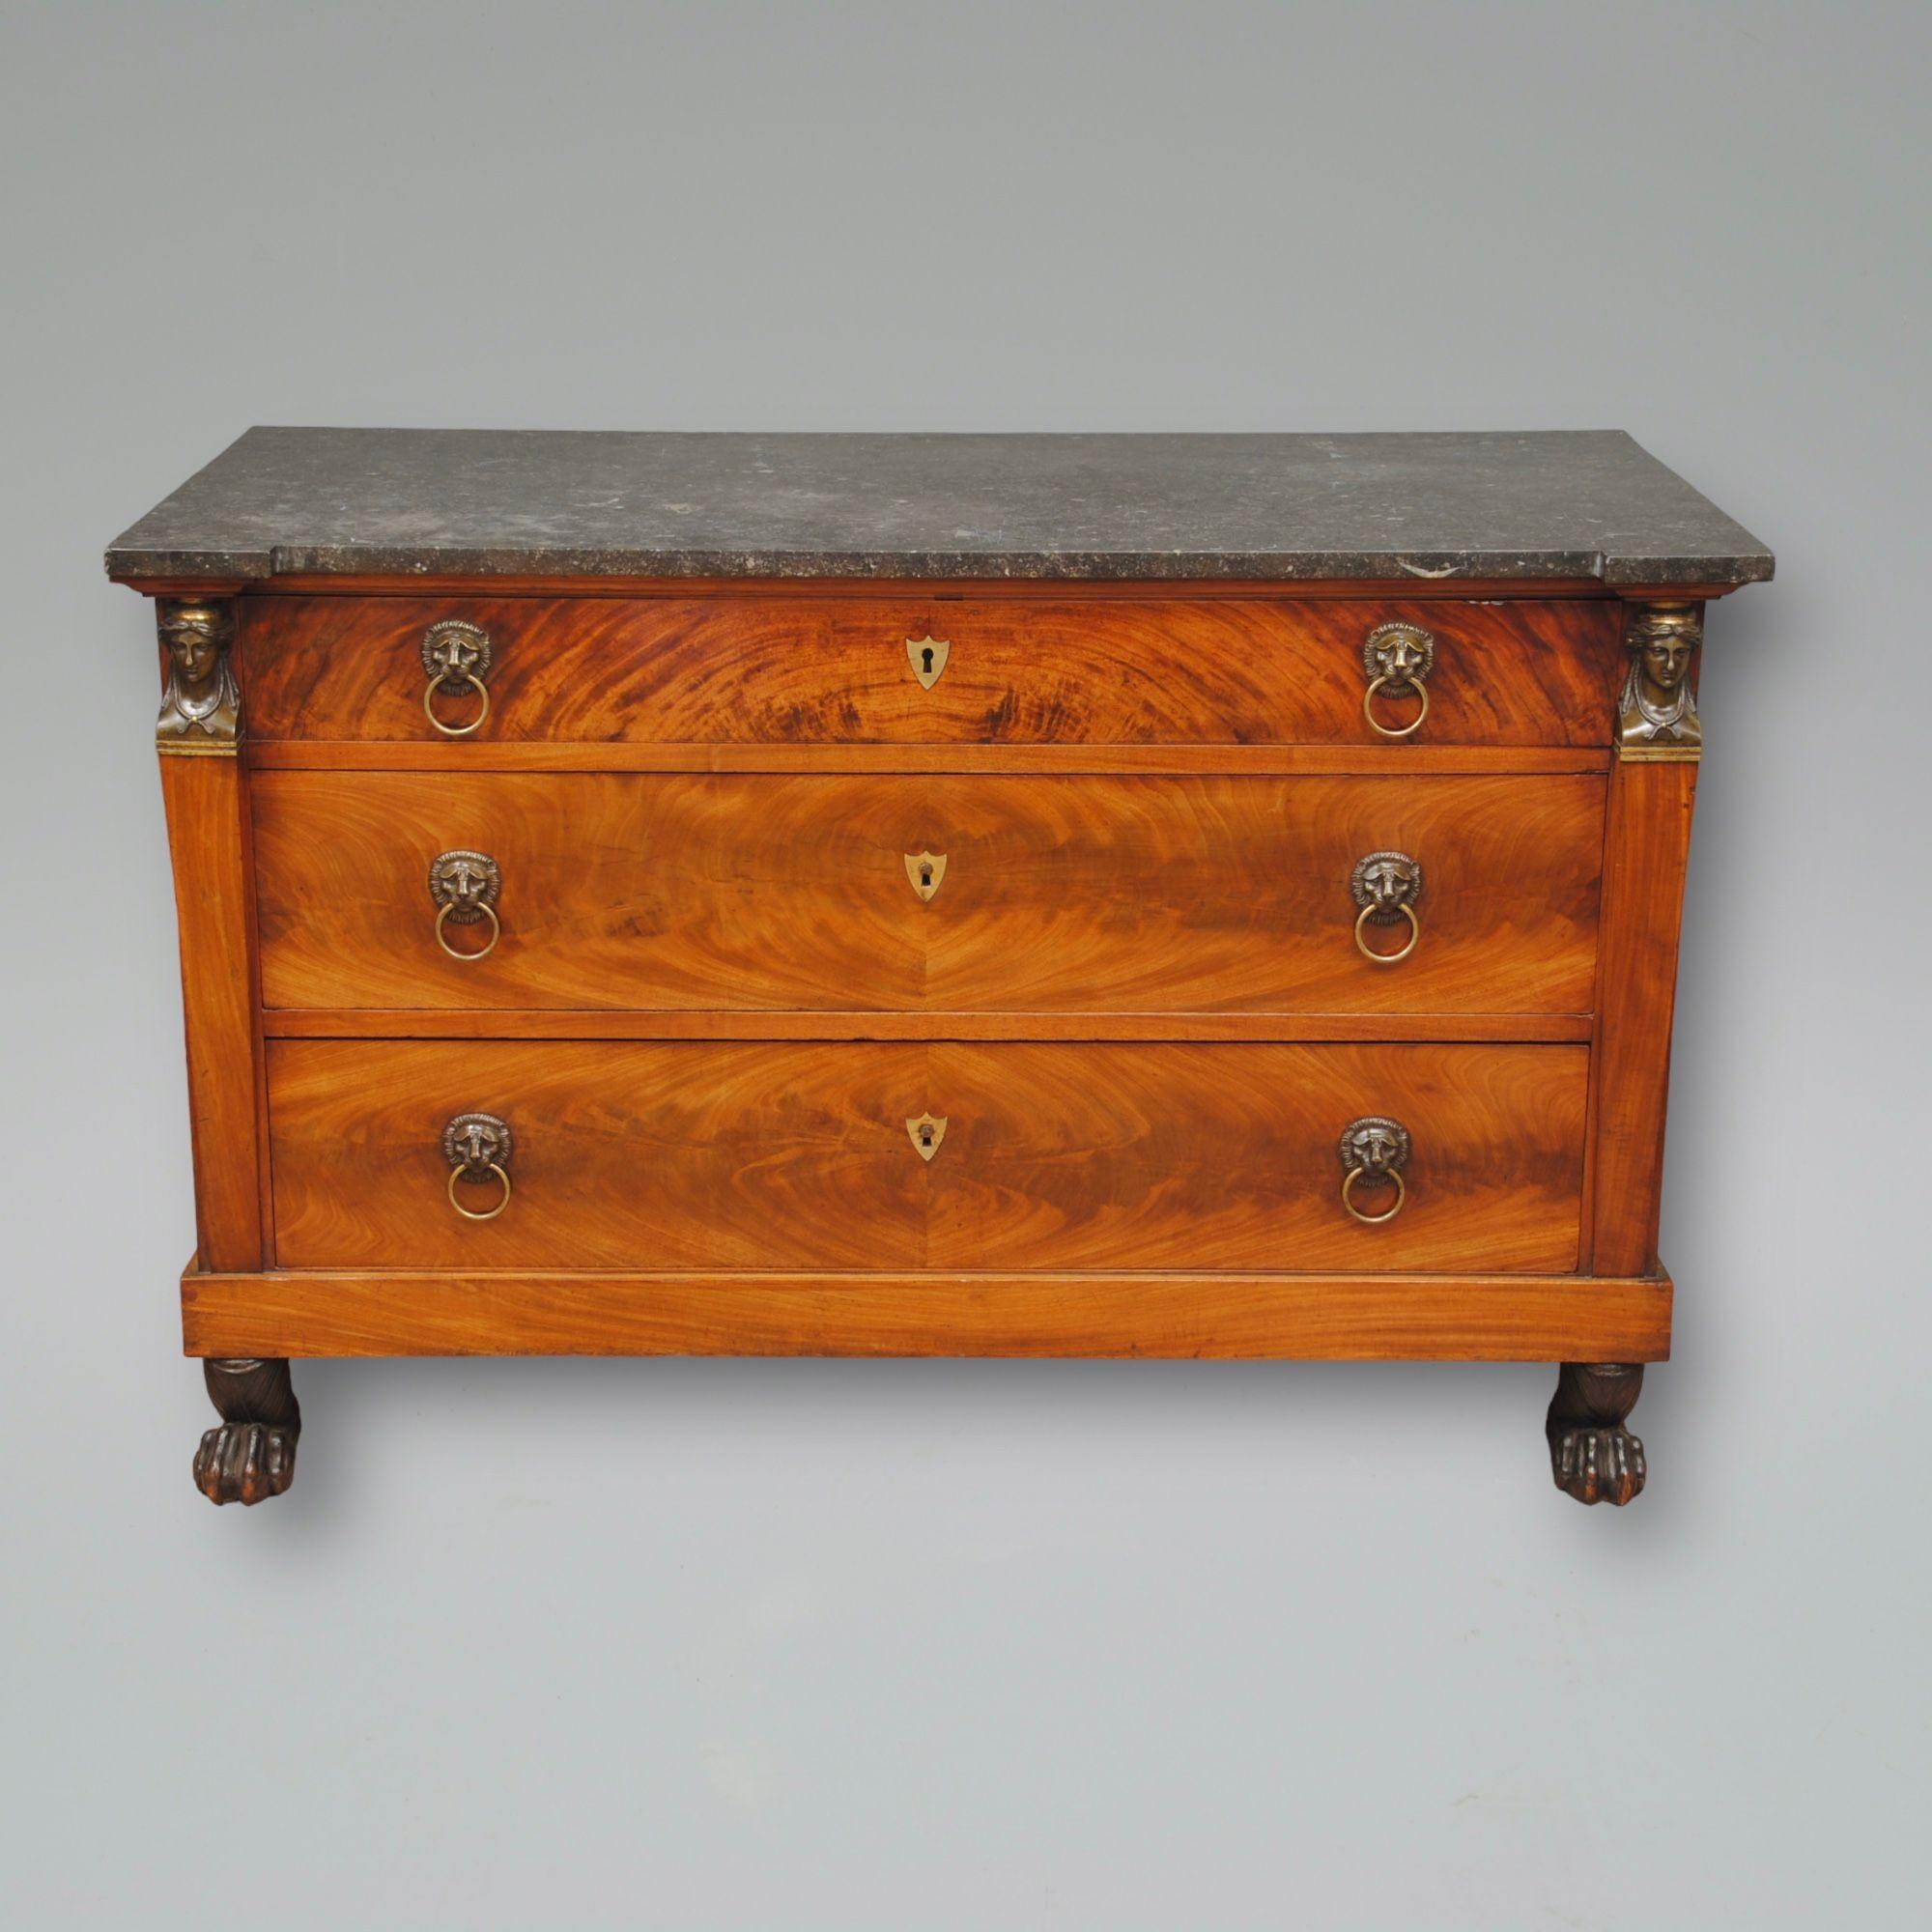 A french marbled top and bronze mounted mahogany commode. The original grey marble top over the three drawers with flame veneers and lion mask handles. The pillars either side are topped with classical heads and it stands on paw feet. Good colour